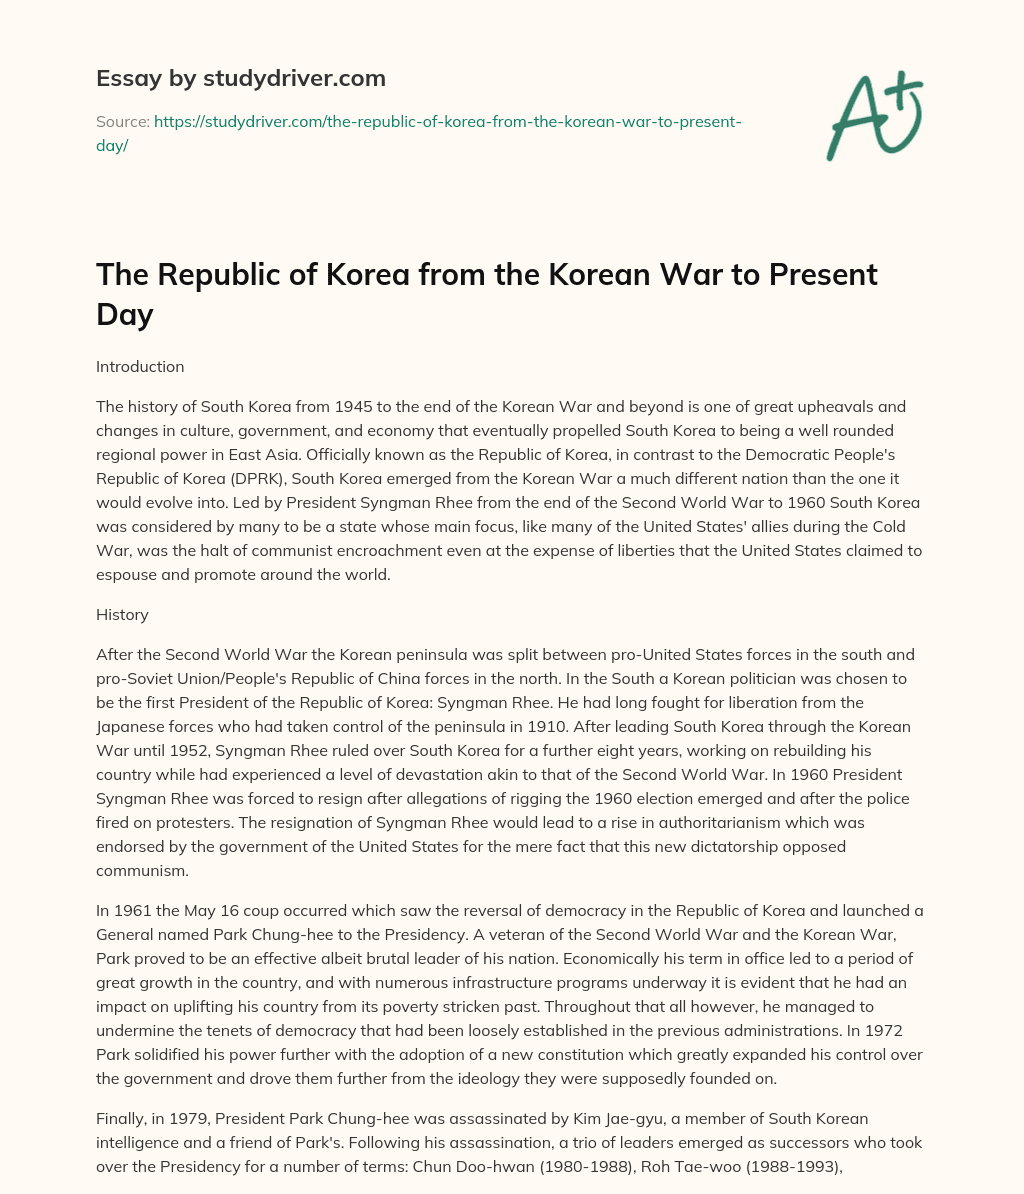 The Republic of Korea from the Korean War to Present Day essay